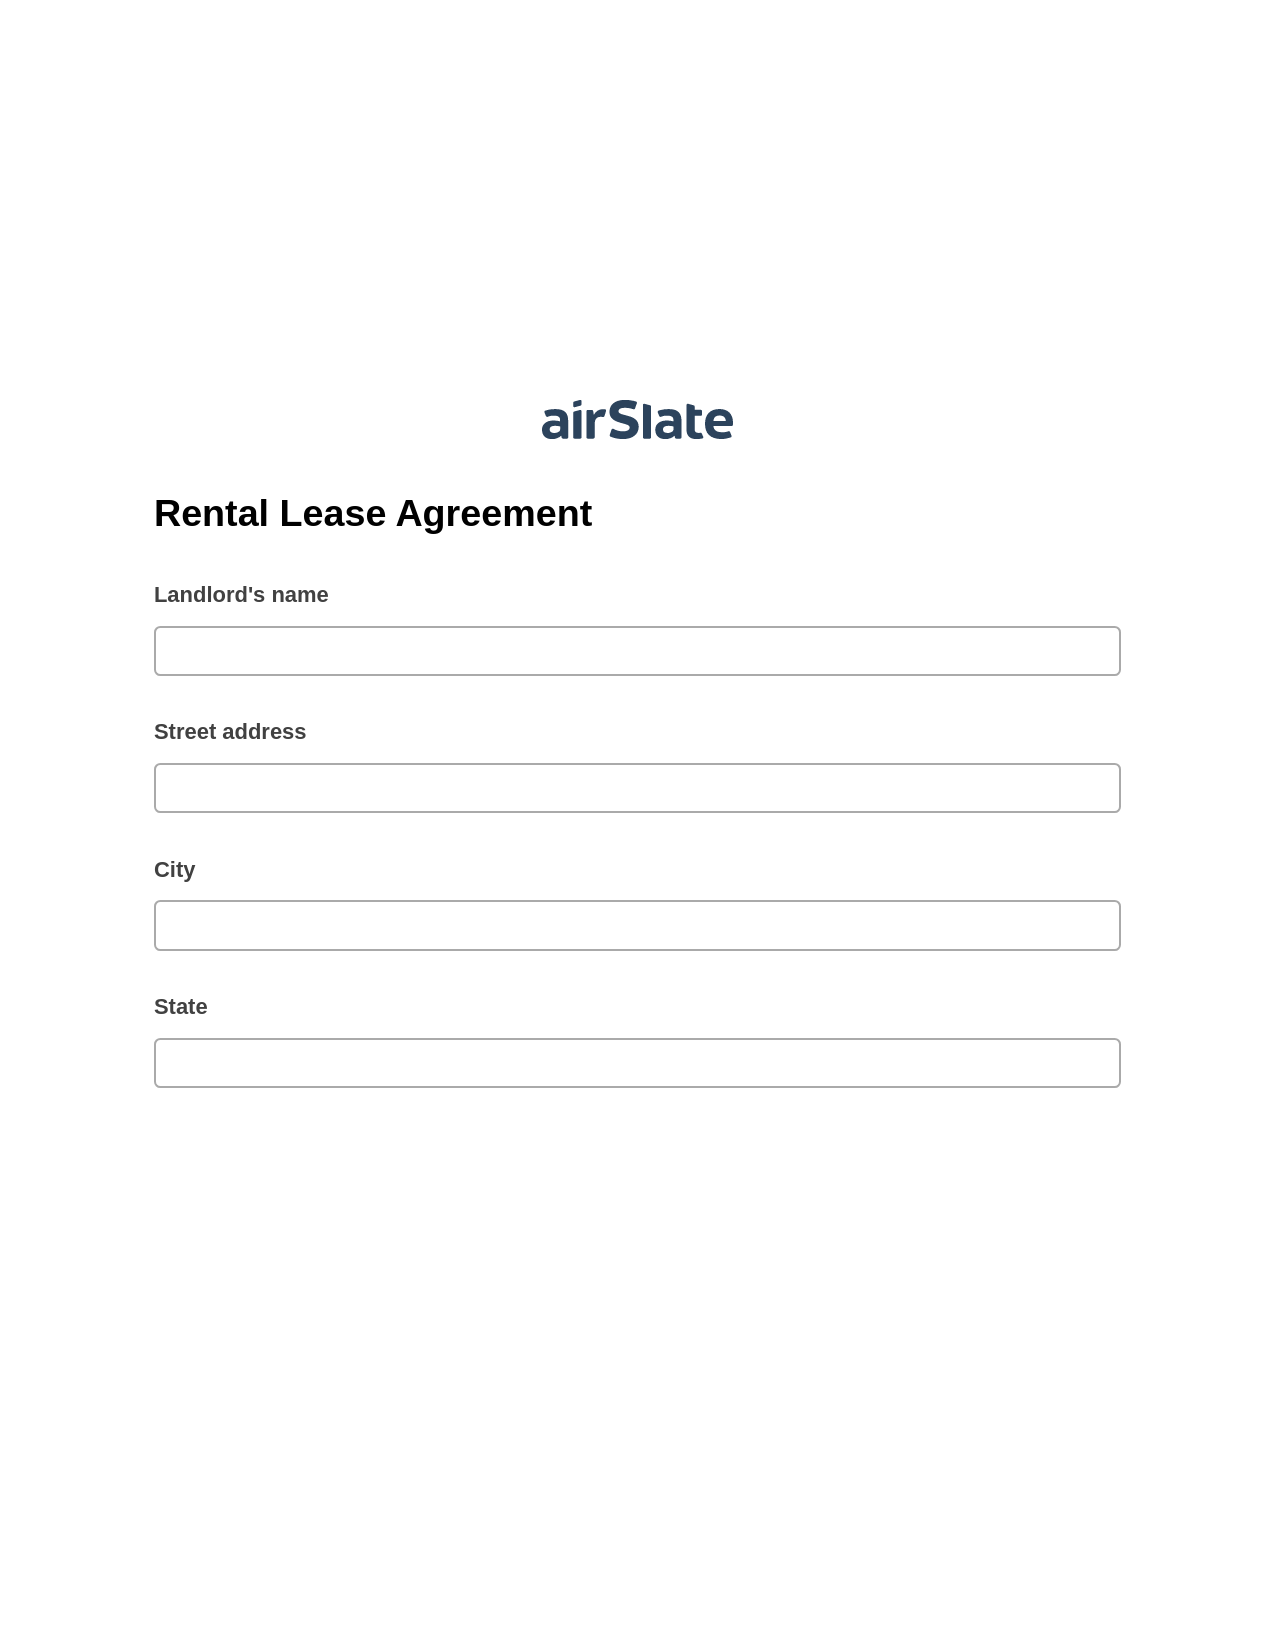 Rental Lease Agreement Pre-fill from Google Sheet Dropdown Options Bot, Text Message Notification Bot, Export to Excel 365 Bot